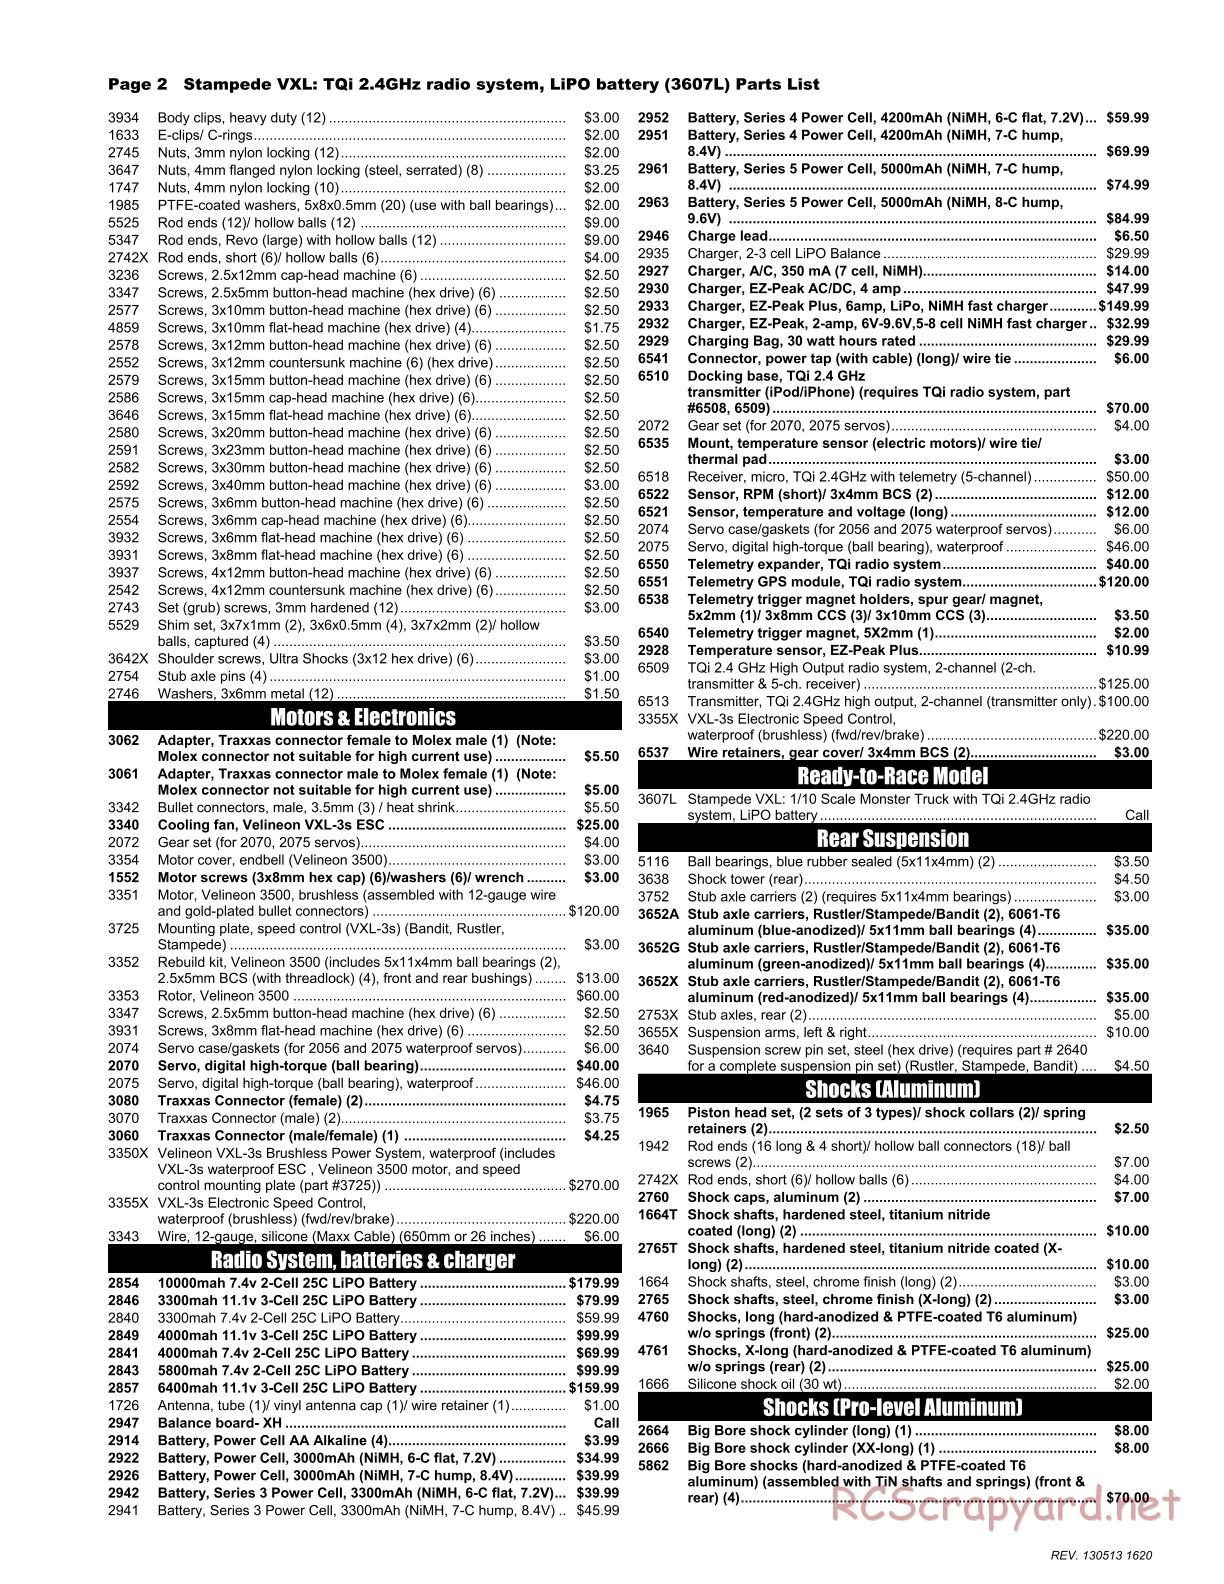 Traxxas - Stampede VXL - Parts List - Page 2